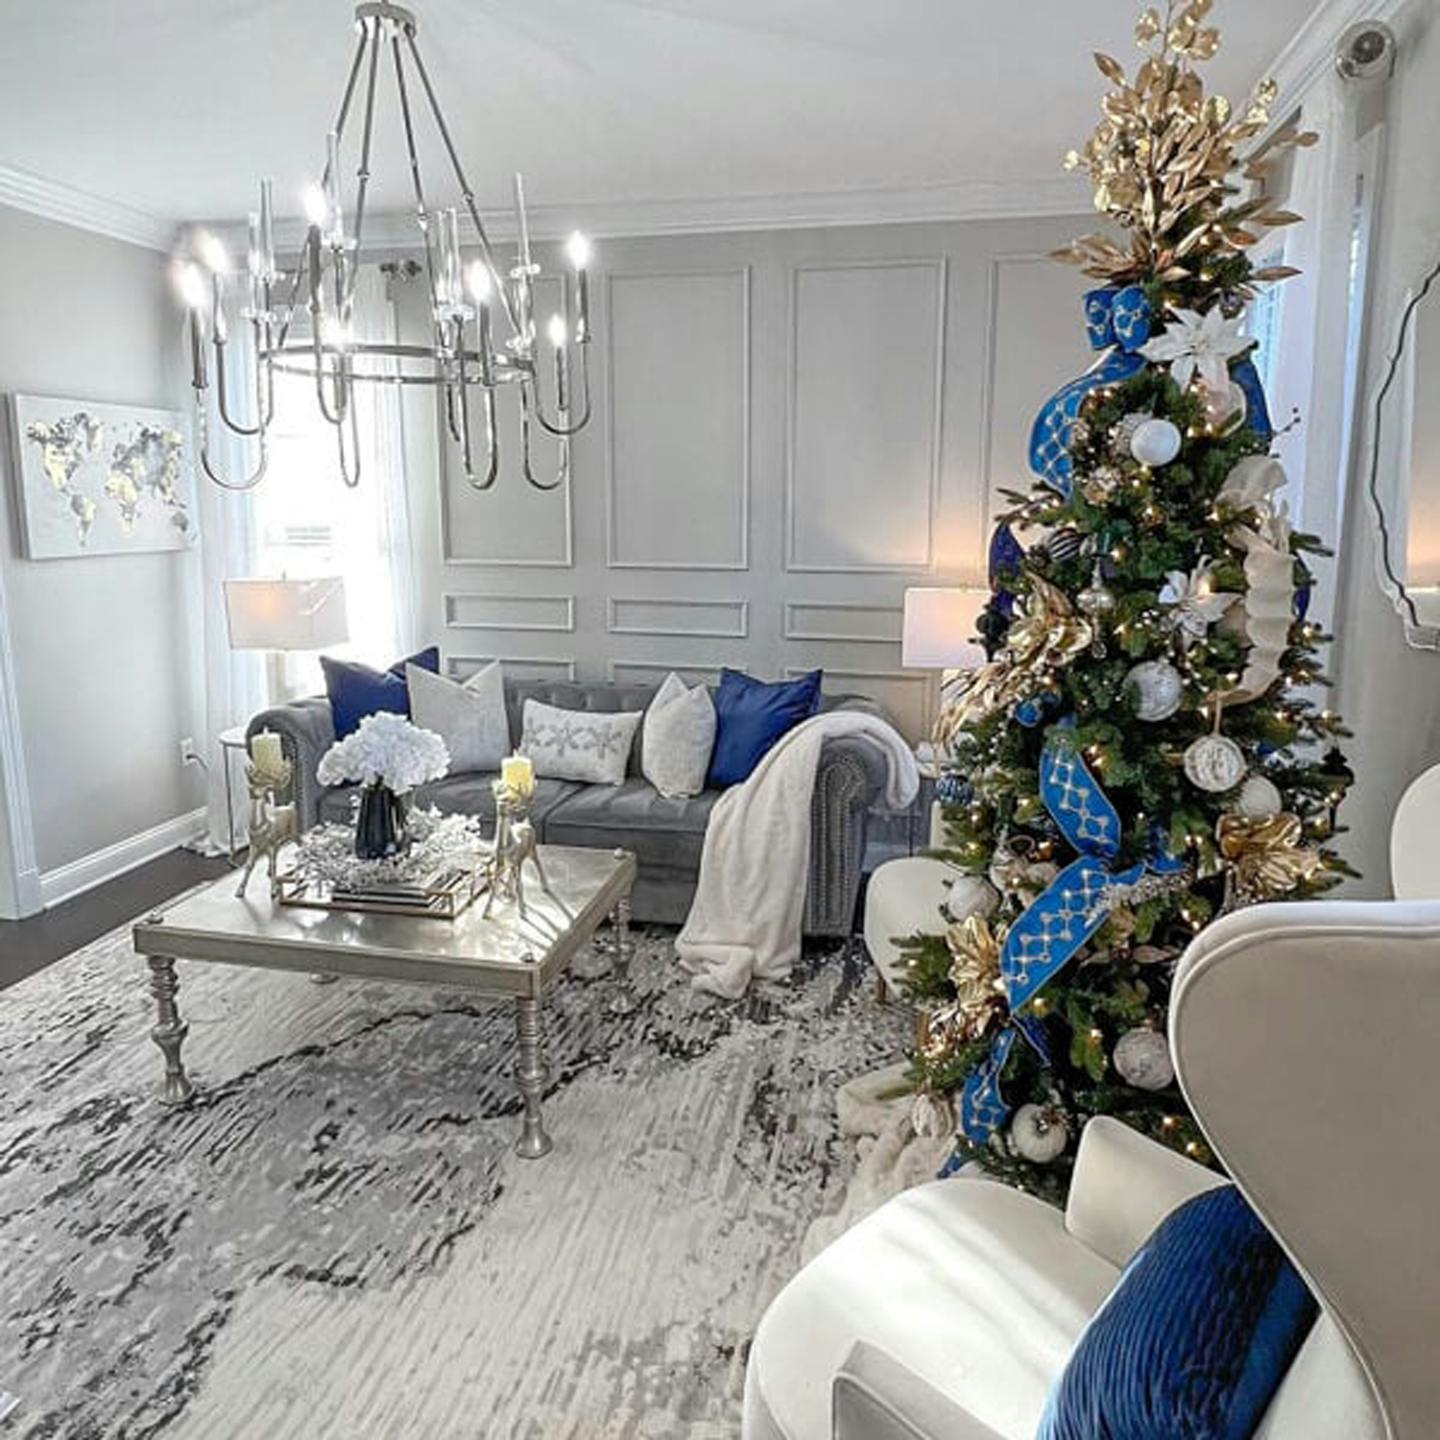 MojisStyle's living room decorated for the holidays